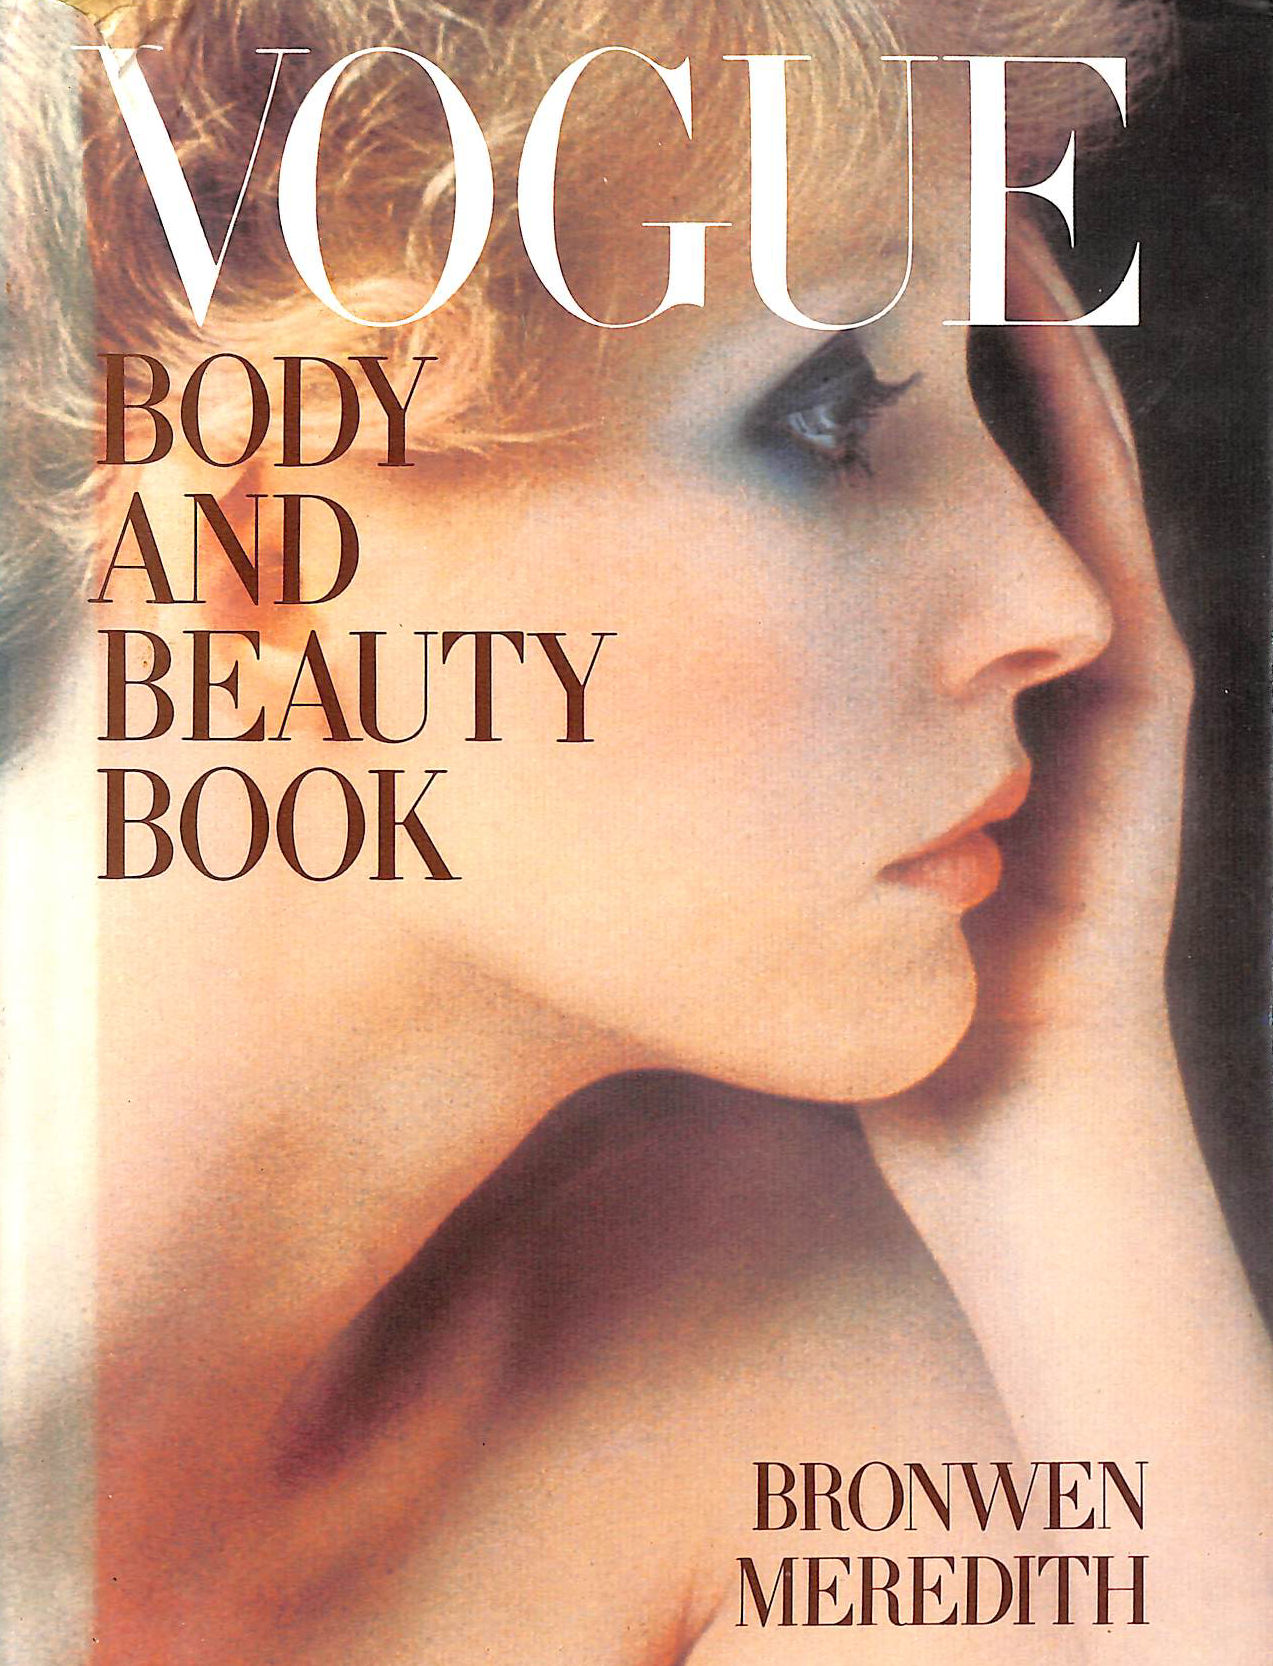 BRONWEN MEREDITH; ILLUSTRATED WITH COLOUR AND BLACK & WHITE PHOTOGRAPHS & ILLUSTRATIONS [ILLUSTRATOR] - Vogue Body and Beauty Book